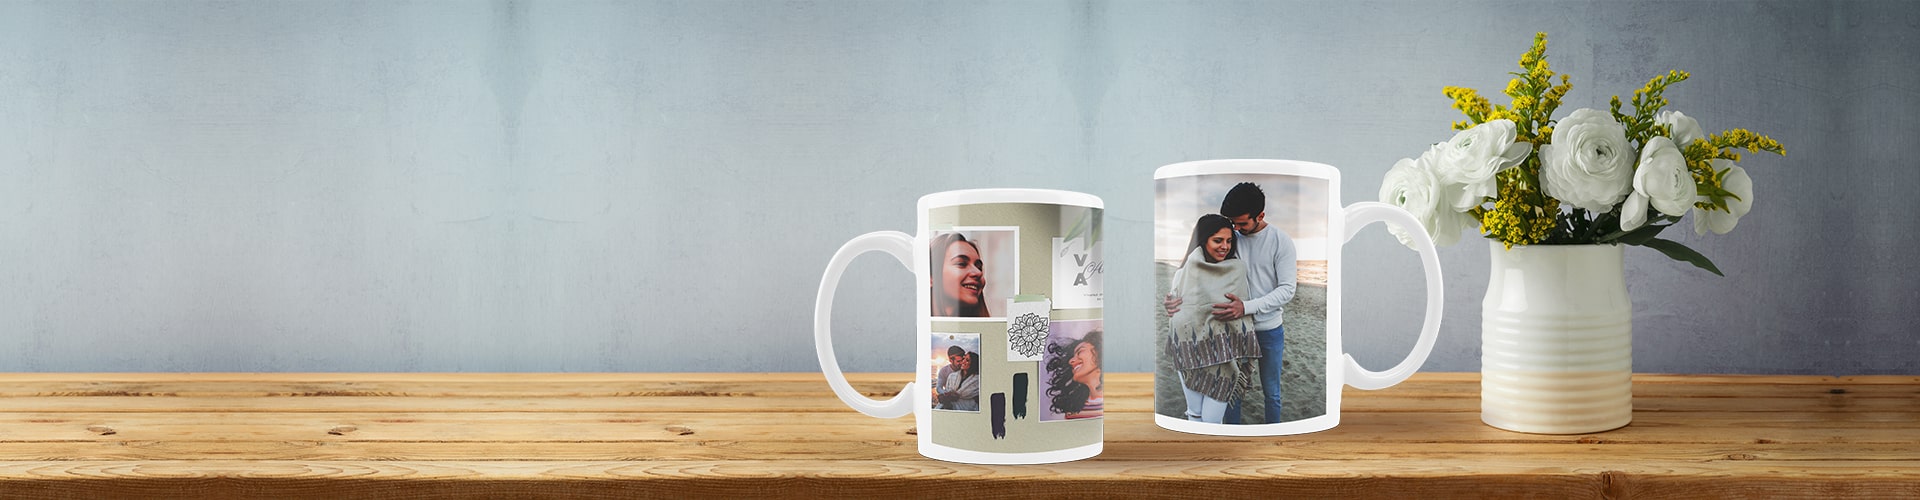 Get to Design Your Very Own Photo Mugs